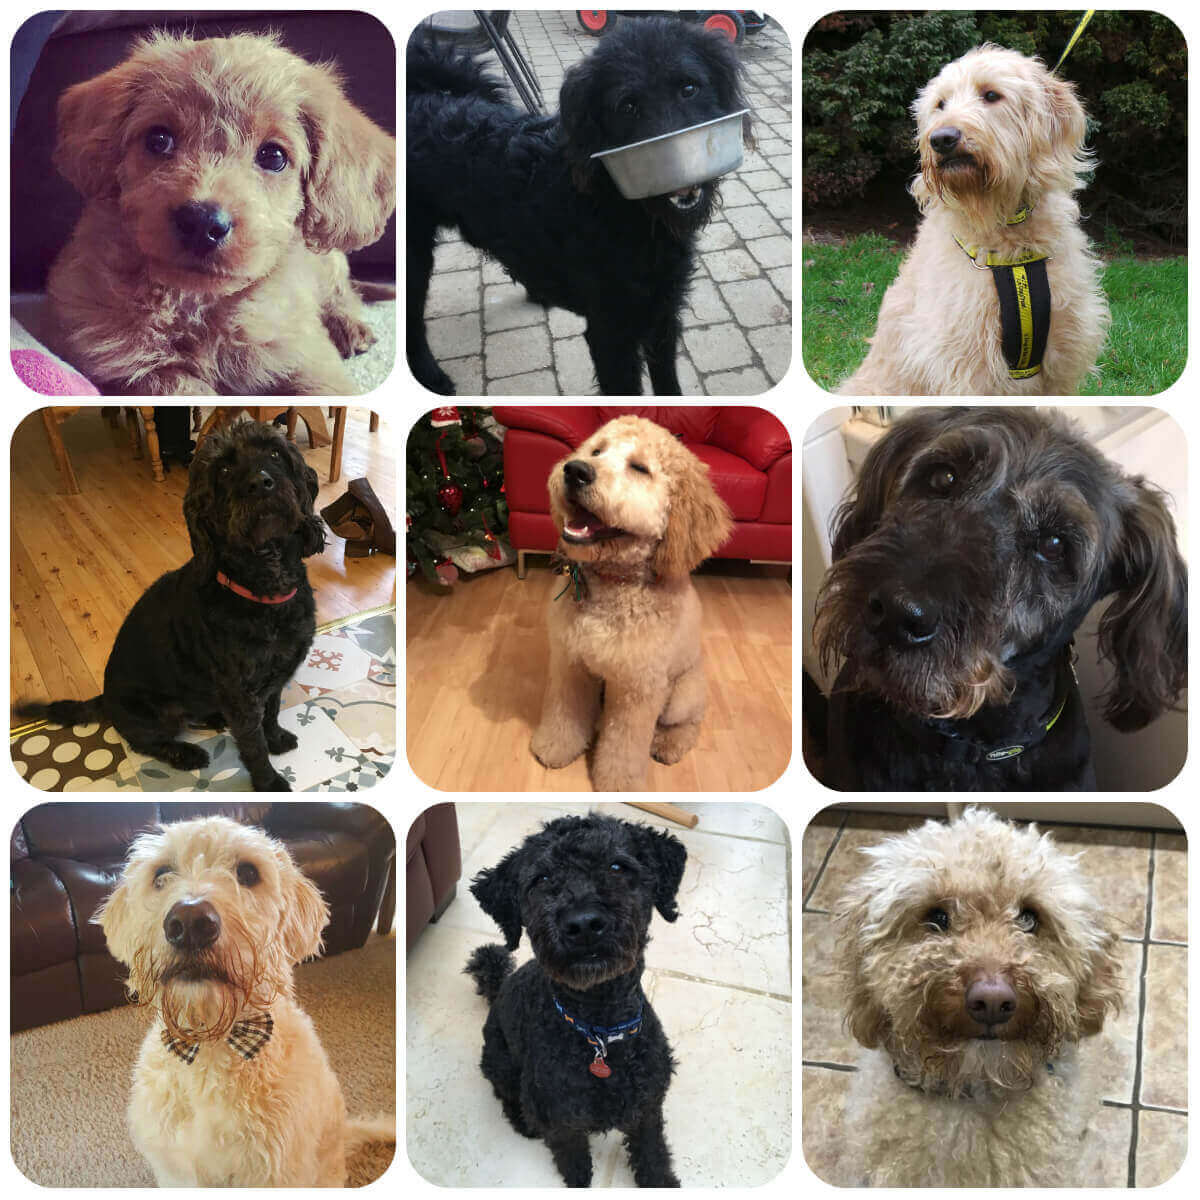 A collage of images of labradoodles. They all have curly hair, but vary a lot in size, colour and features.